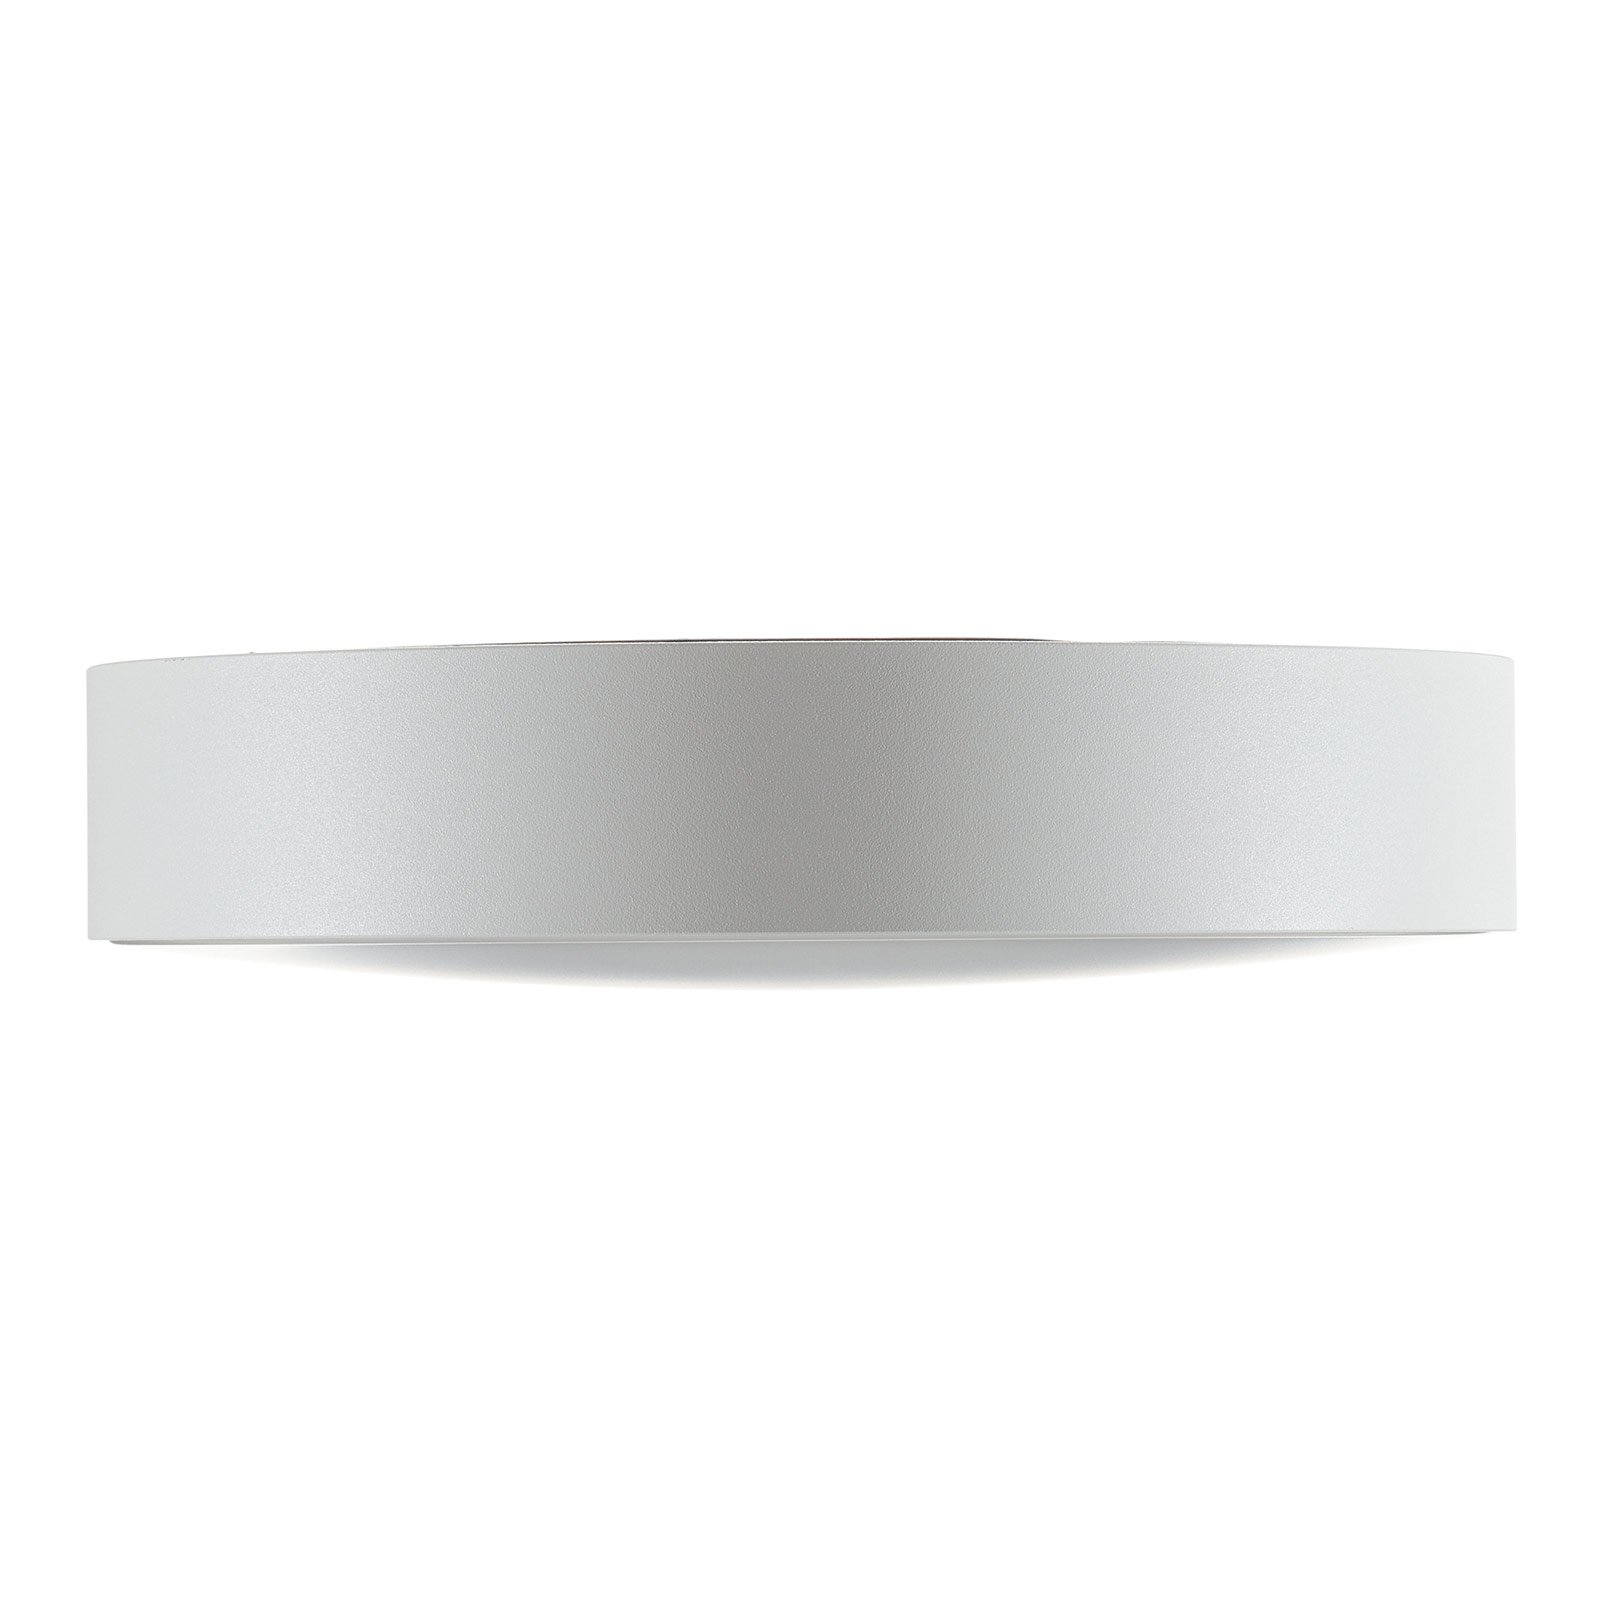 WEVER &amp; DUCRÉ Roby IP44 a soffitto 2.700K 26 cm bianco